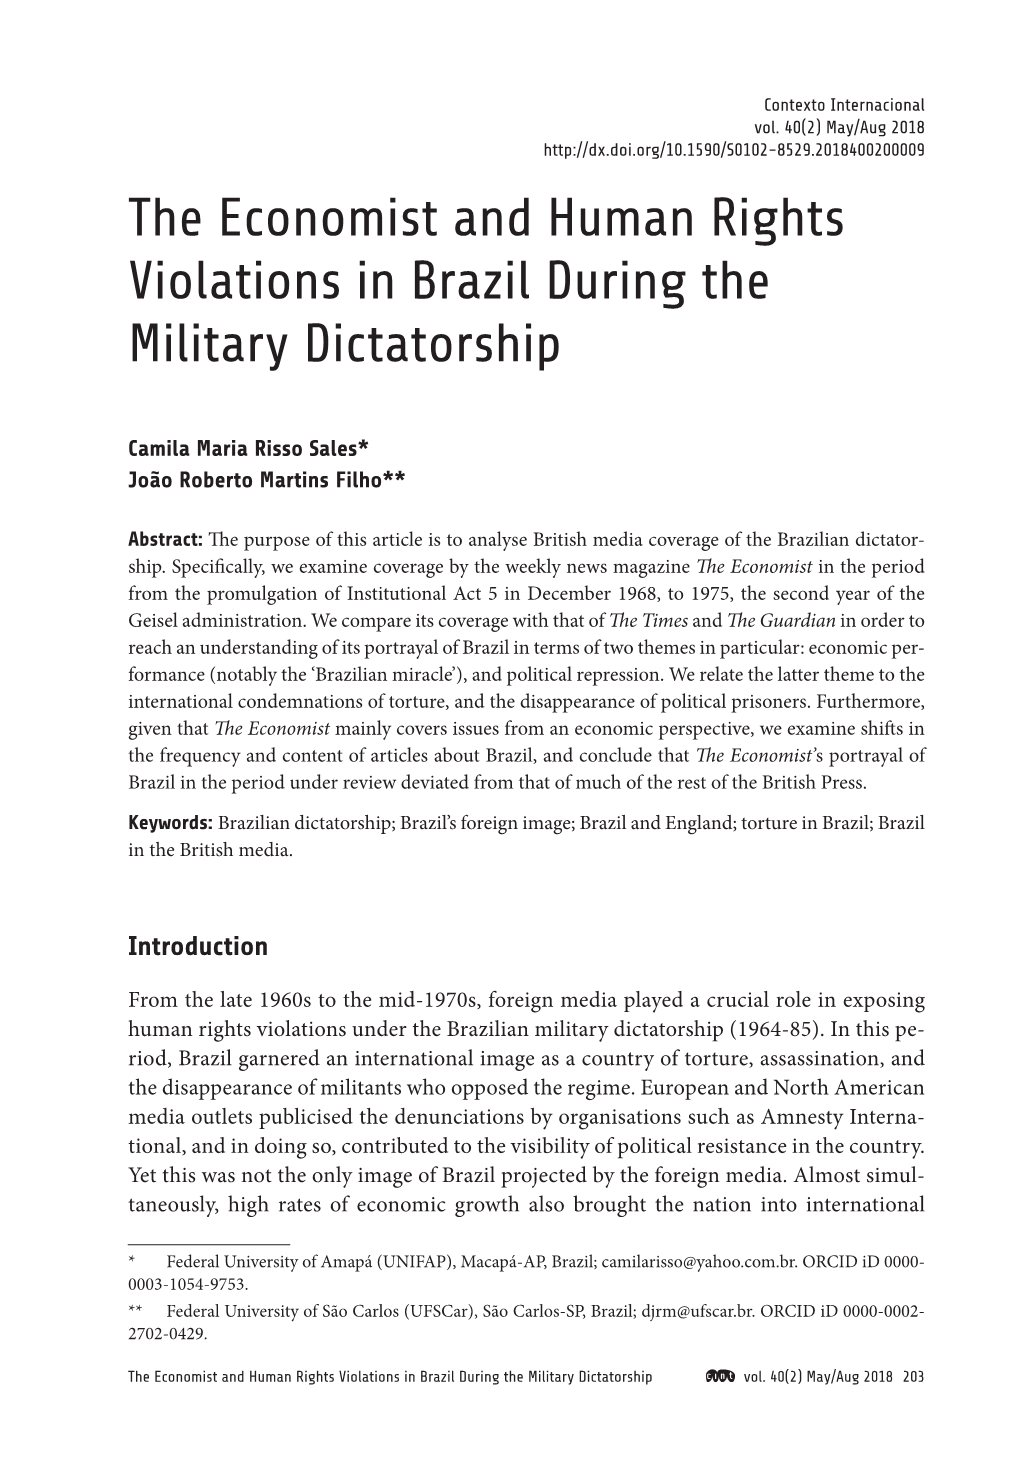 The Economist and Human Rights Violations in Brazil During the Sales & Martins Filho Military Dictatorship